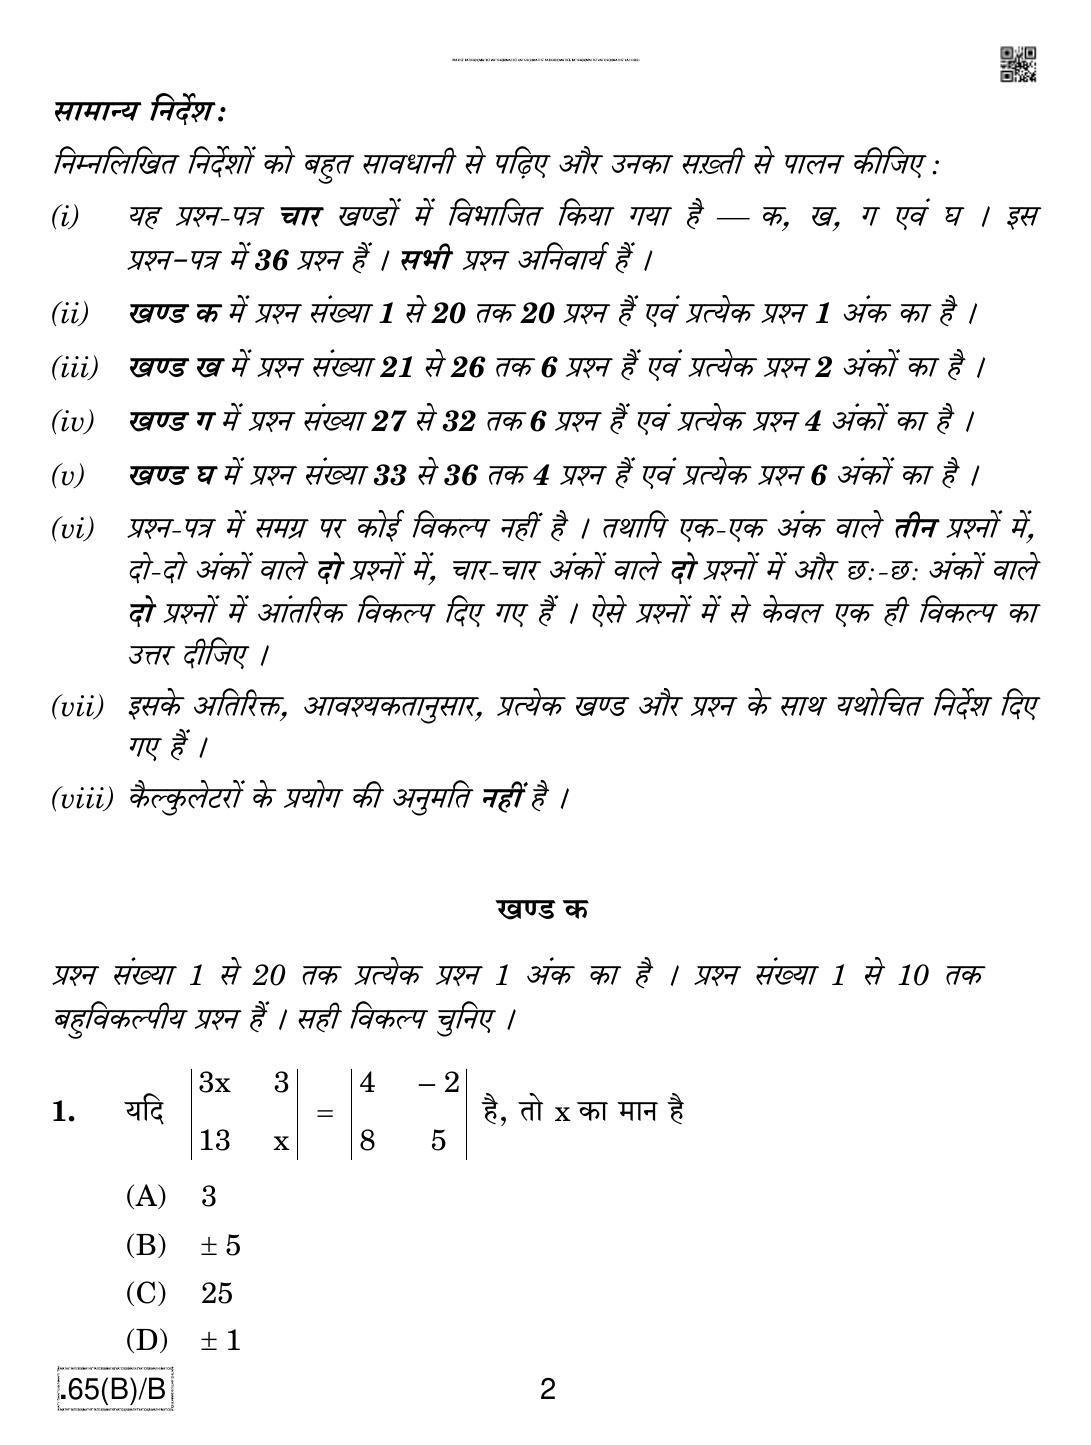 CBSE Class 12 65(B)-C - Maths For Blind Candidates 2020 Compartment Question Paper - Page 2